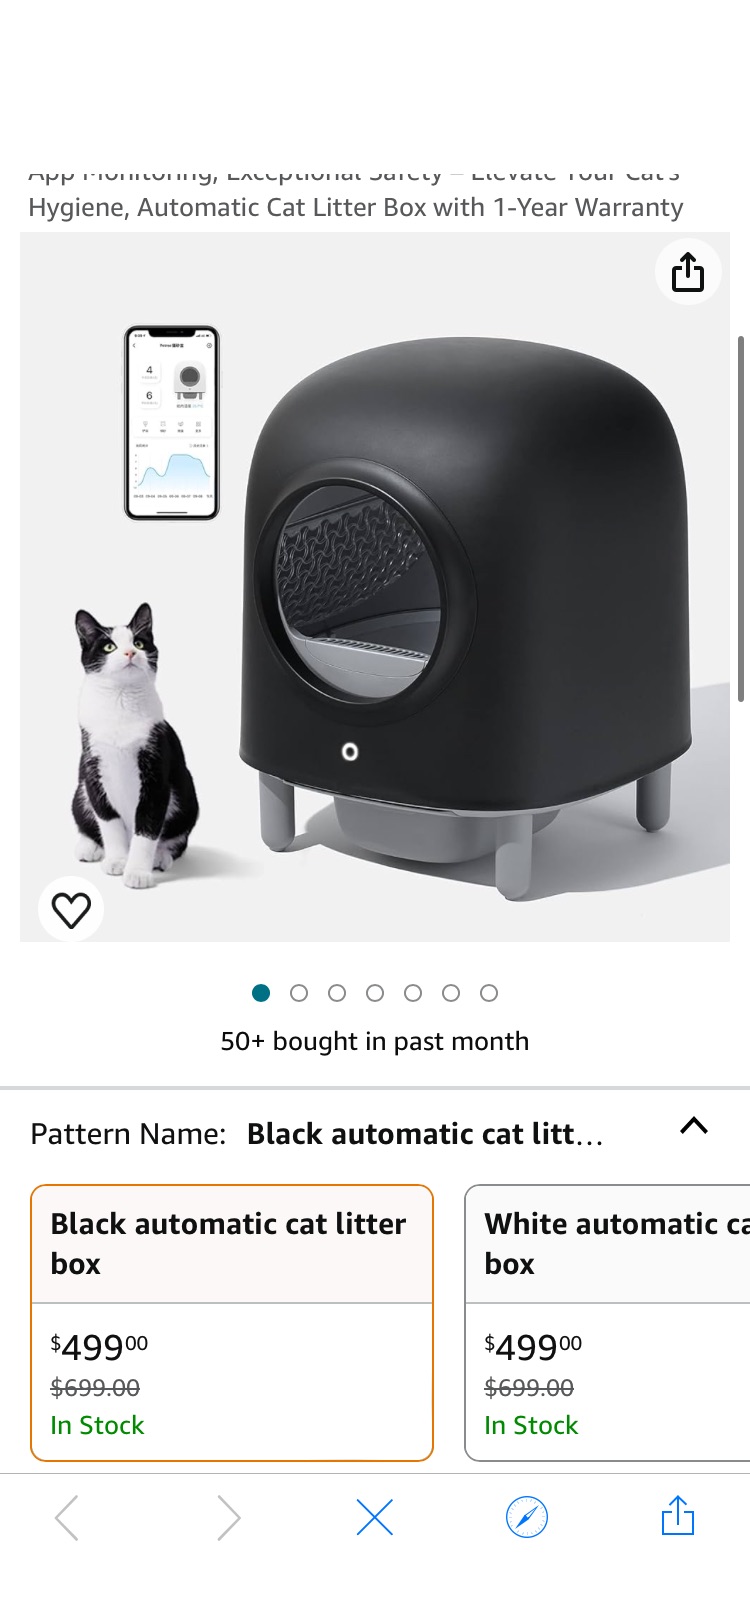 Petree Self-Cleaning Cat Litter Box with Wi-Fi Enabled, App Monitoring, Exceptional Safety – Elevate Your Cat's Hygiene, Automatic Cat Litter Box with 1-Year Warranty : Amazon.ca: Pet Supplies